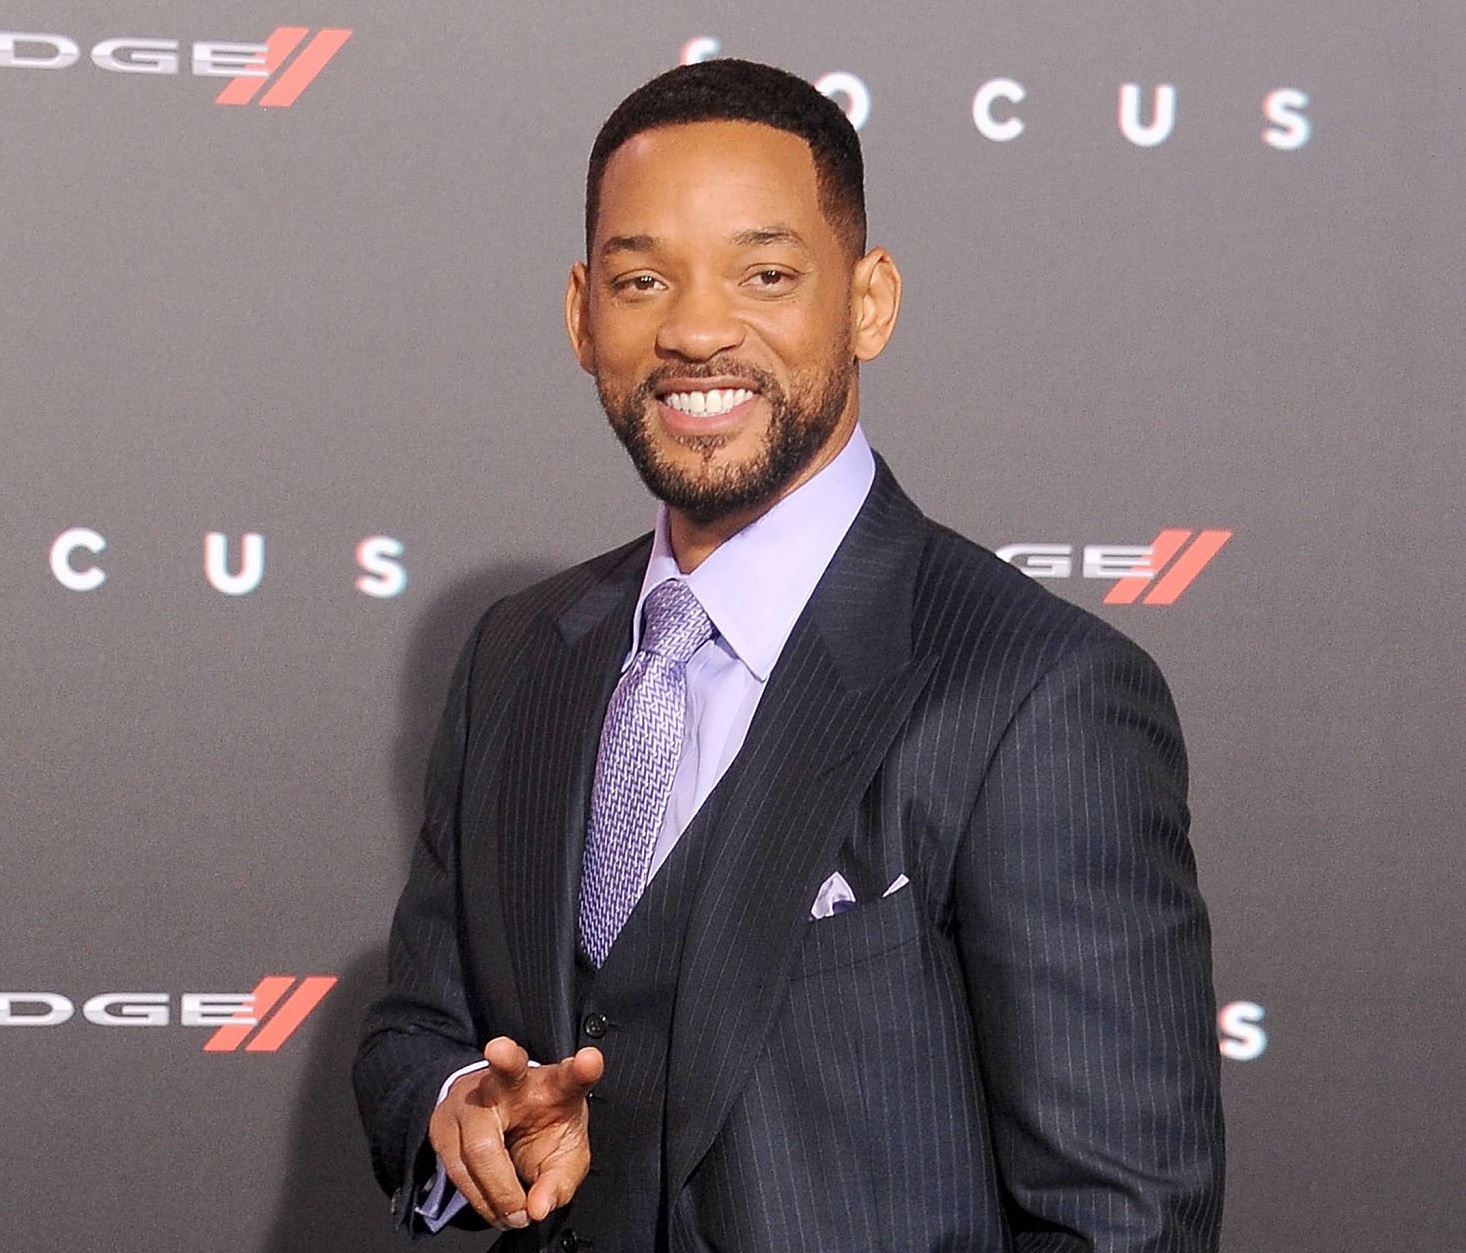  Will Smith attended the Los Angeles World Premiere of Warner Bros. Pictures Focus in 2015